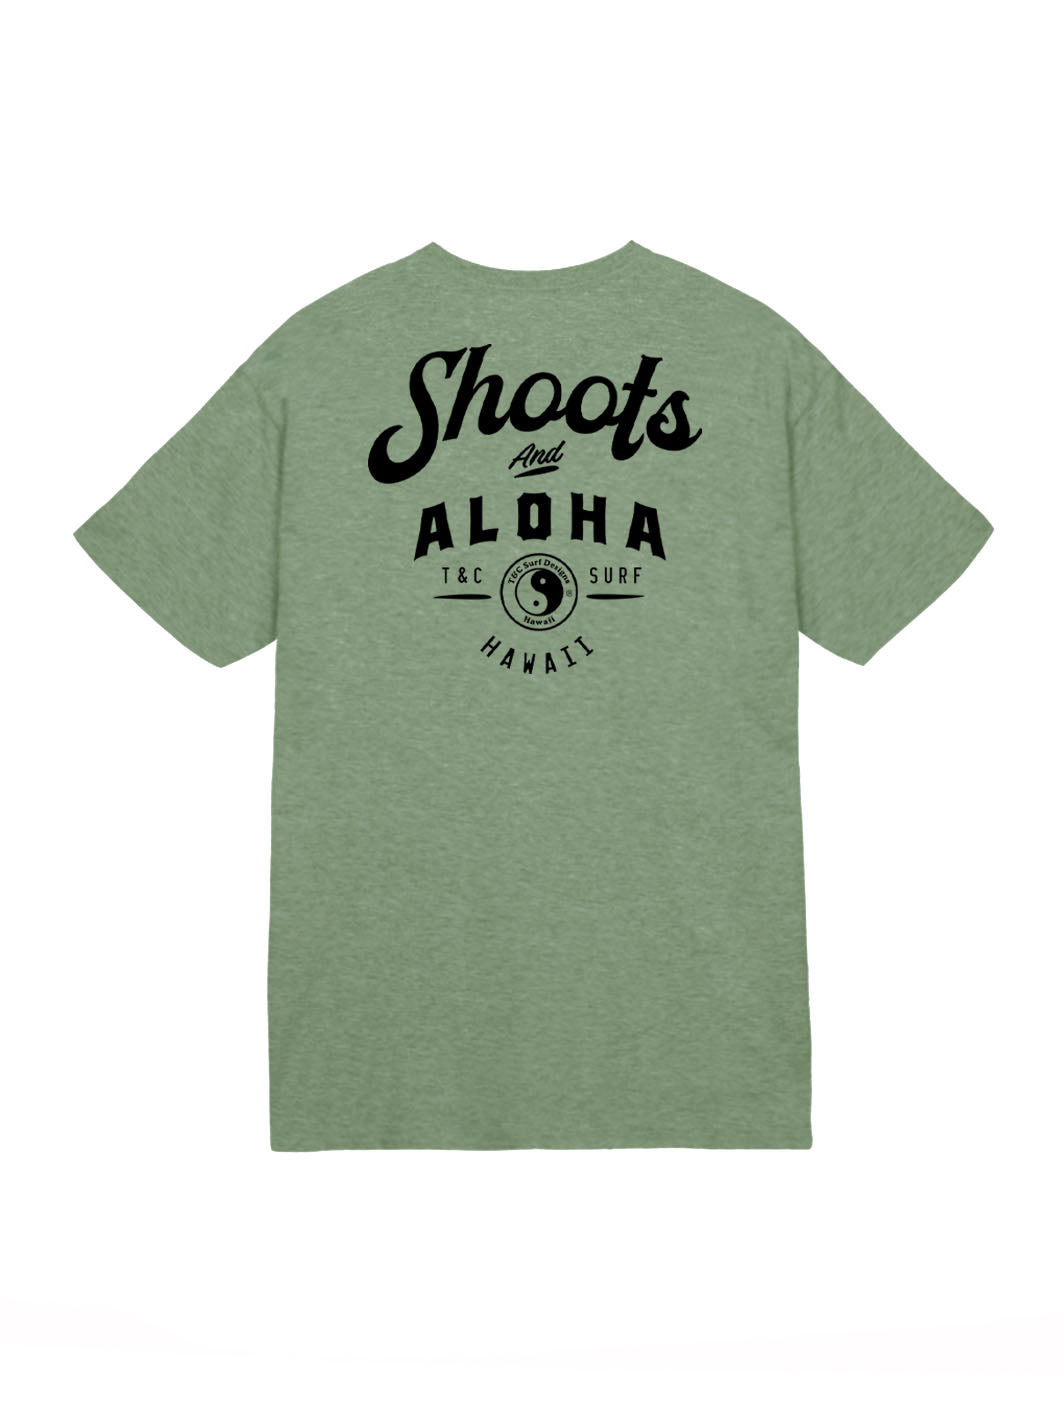 T&C Surf Designs T&C Surf Shoots and Aloha Jersey Tee, S / Heather Military